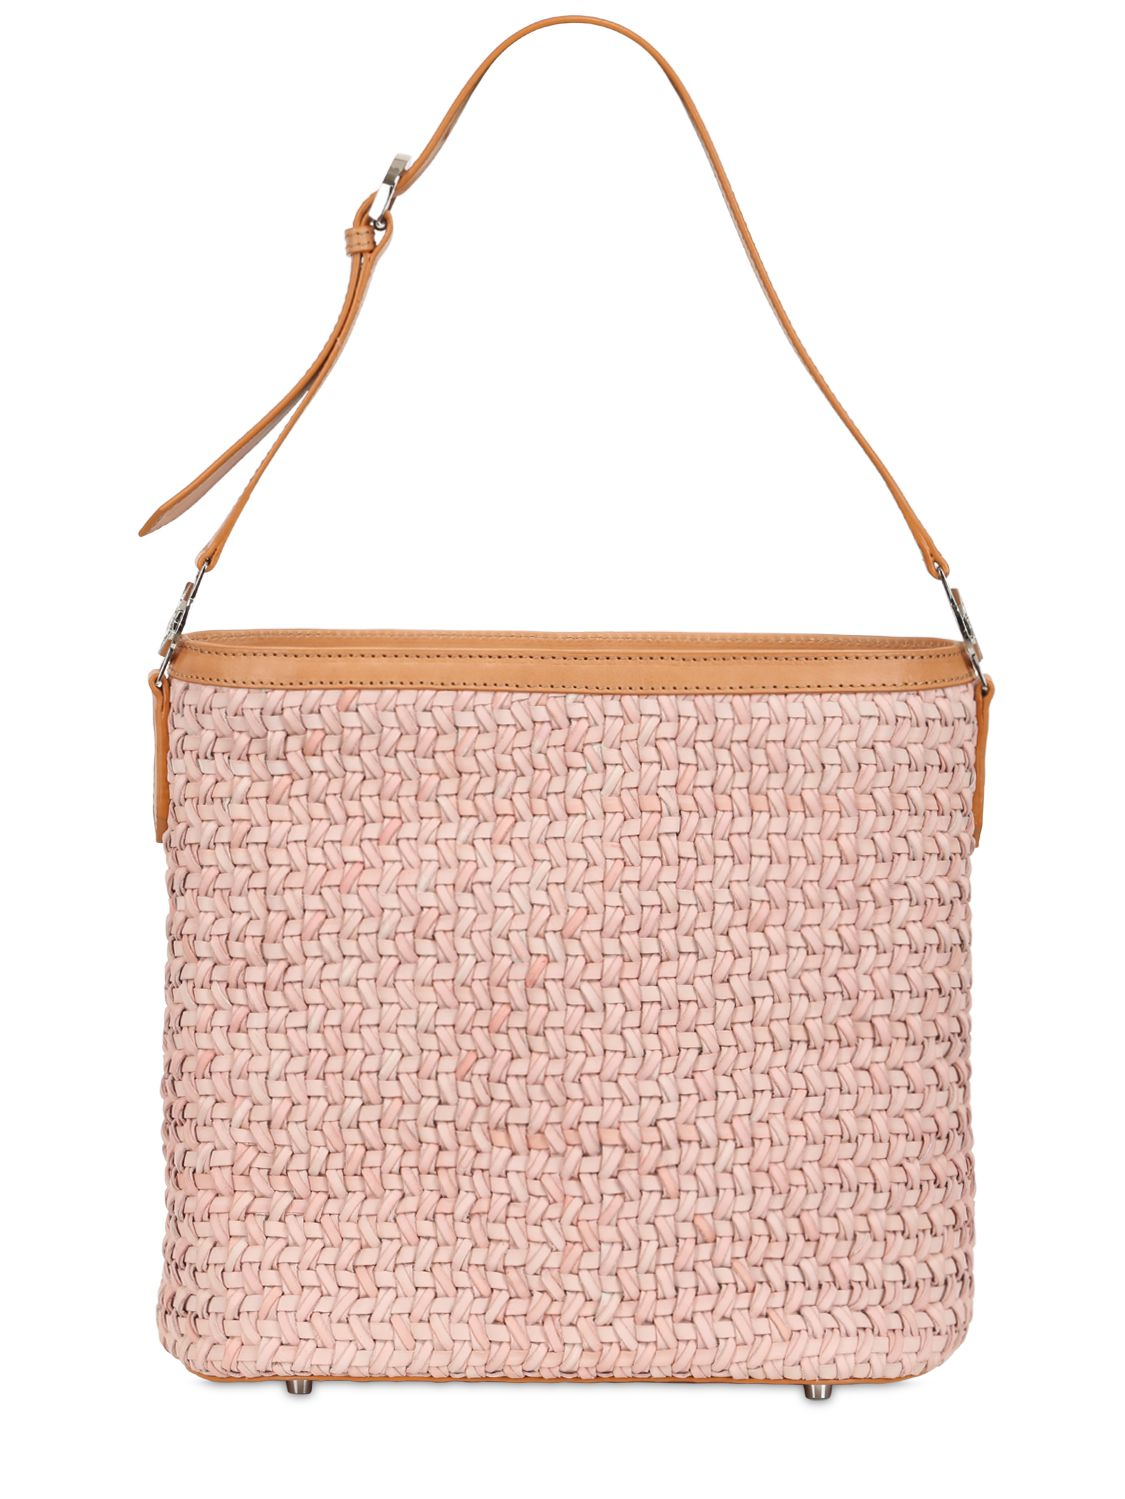 Desmo Woven Leather Shoulder Bag in Pink | Lyst